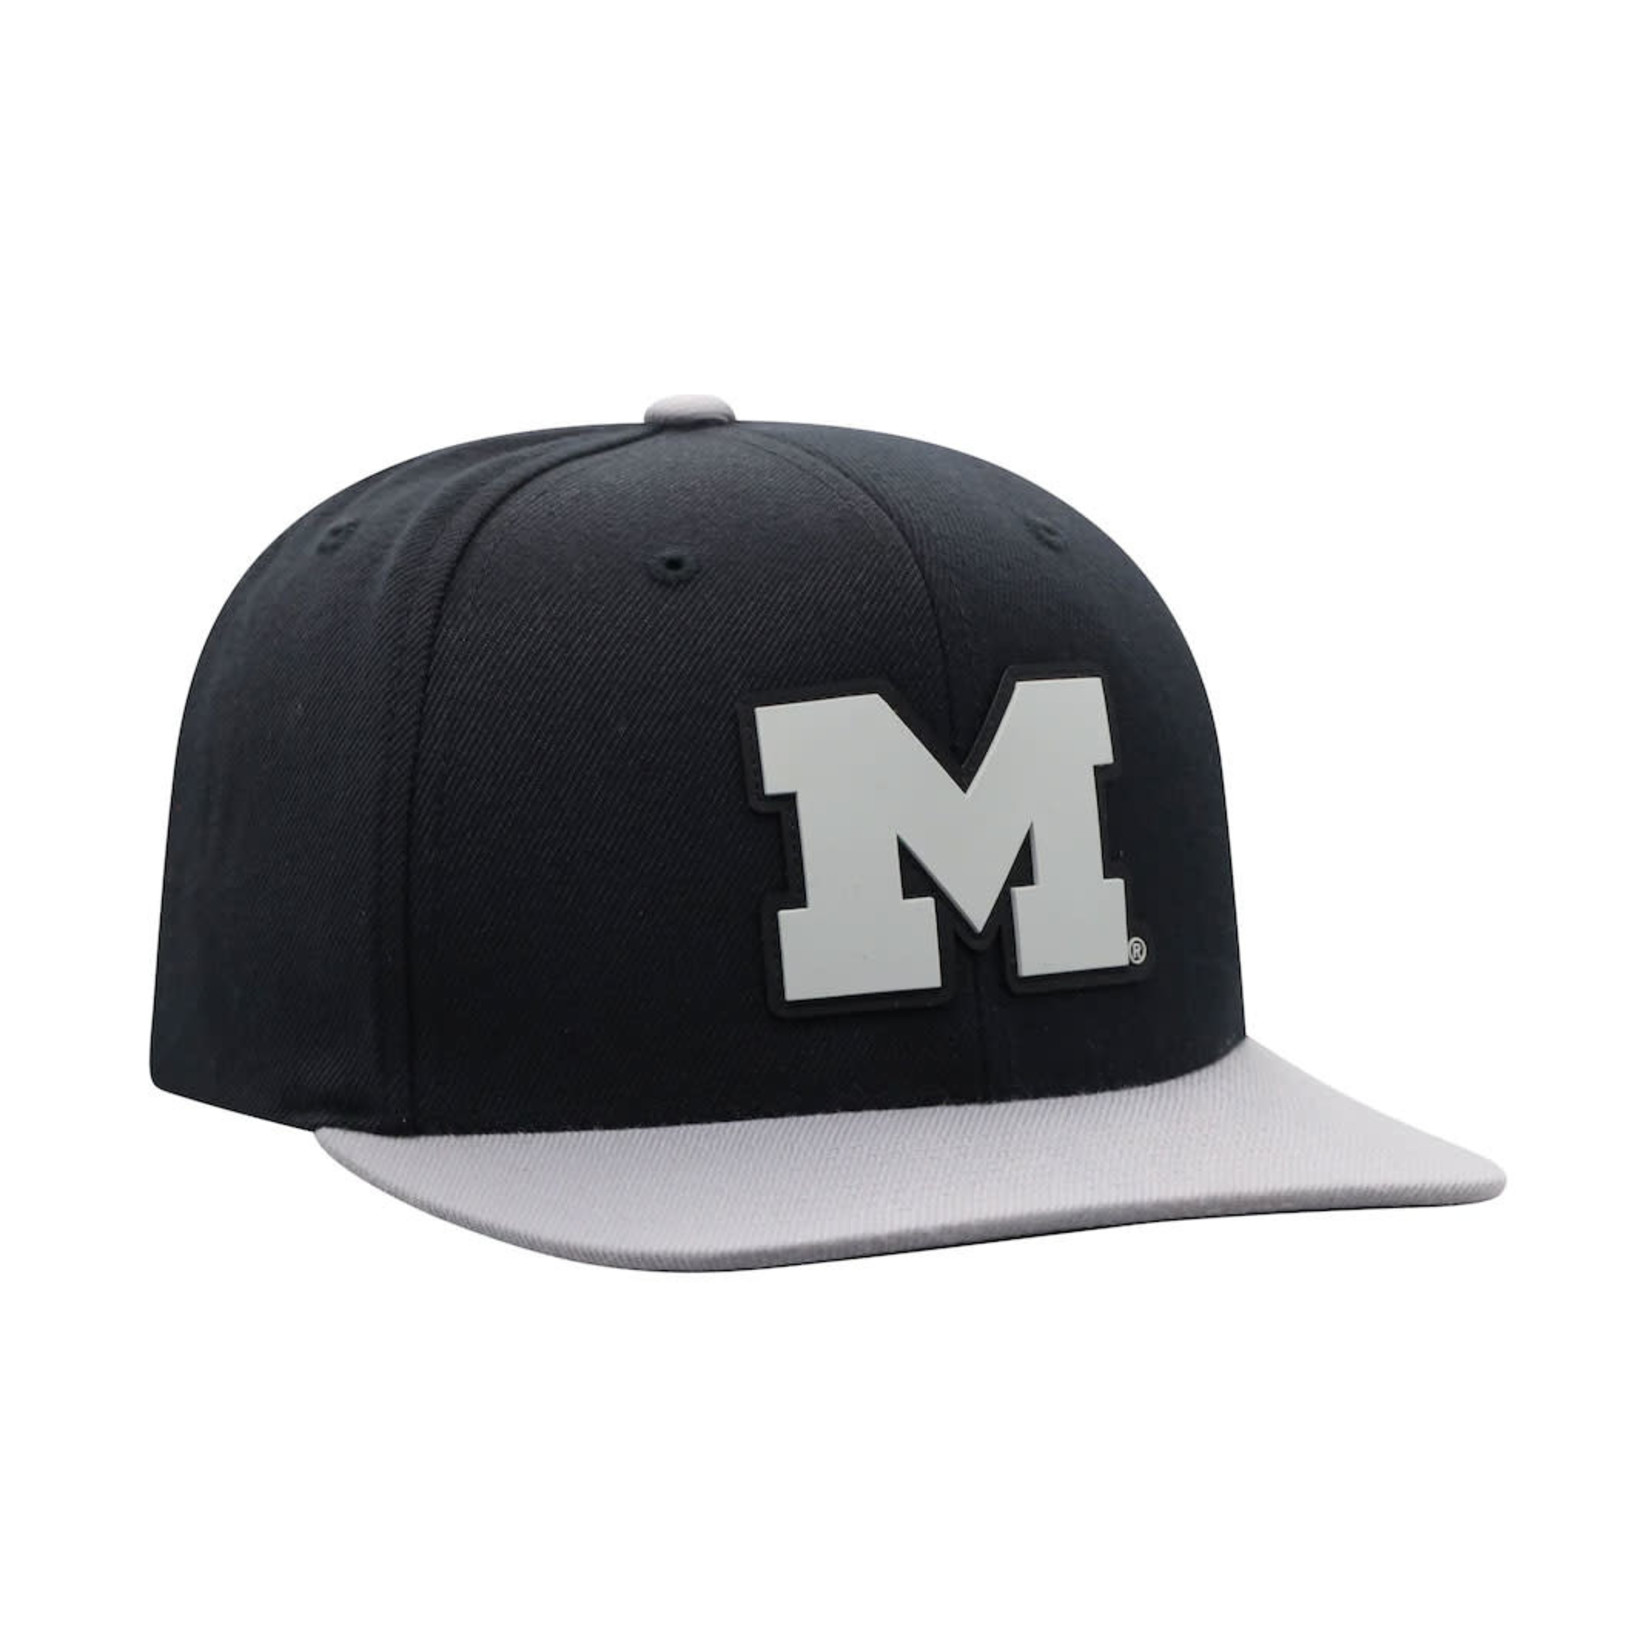 Top of the World NCAA Michigan Wolverines Atticus Snapback Hat